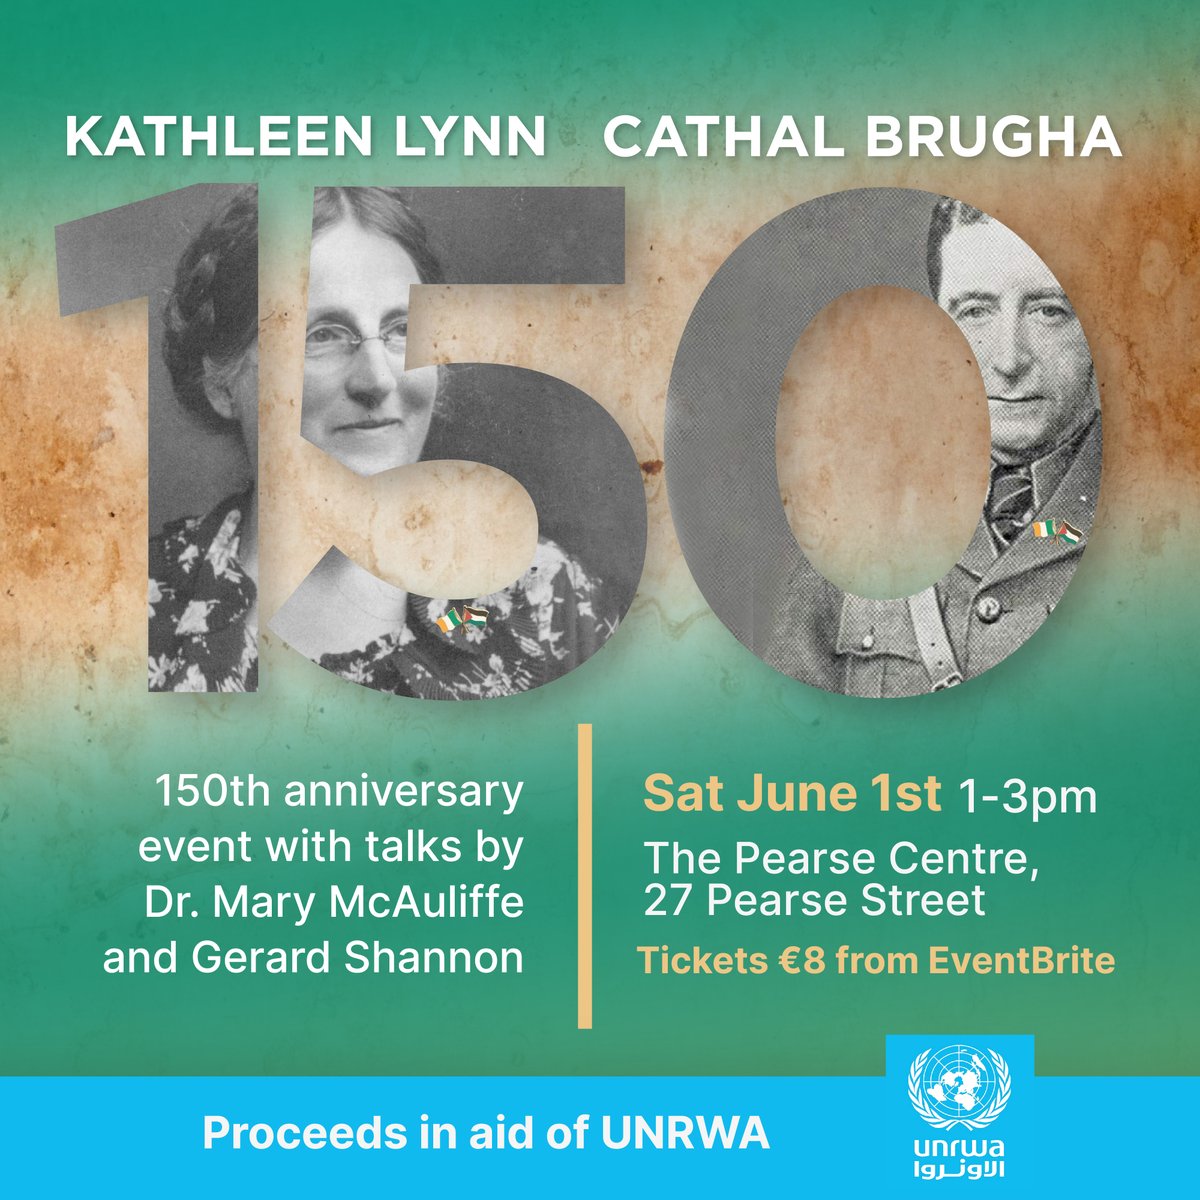 One for the diary! Tickets €8, proceeds in aid of UNRWA eventbrite.ie/e/150-kathleen… @gerry_shannon @MaryMcAuliffe4 @lizgillis191623